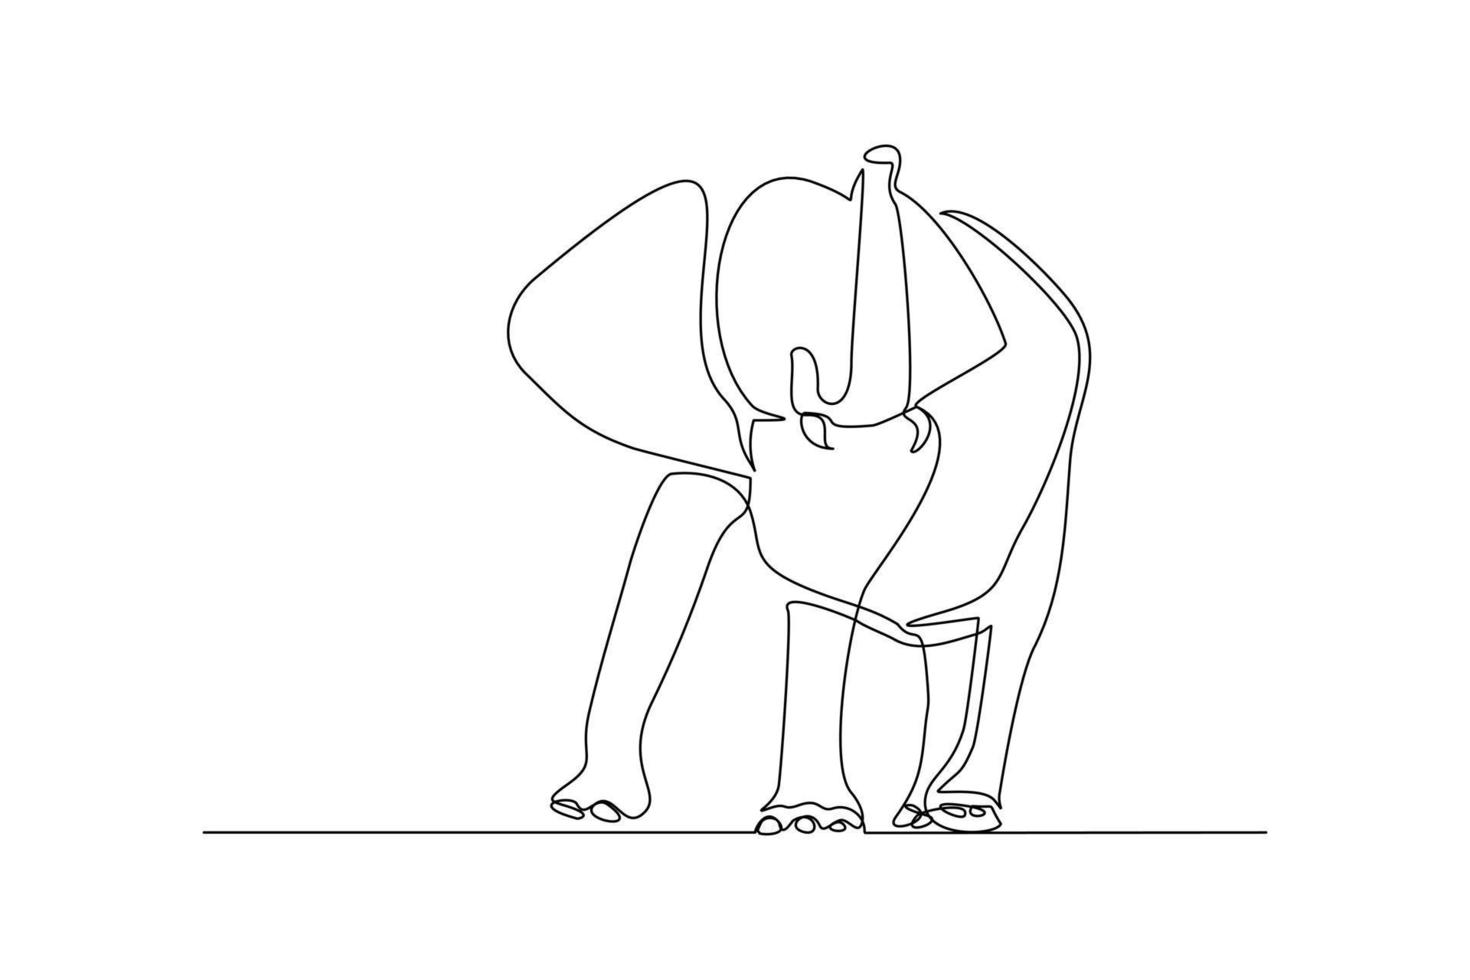 Continuous line of walking standing elephant. Single one line art of wild elephant. Vector illustration